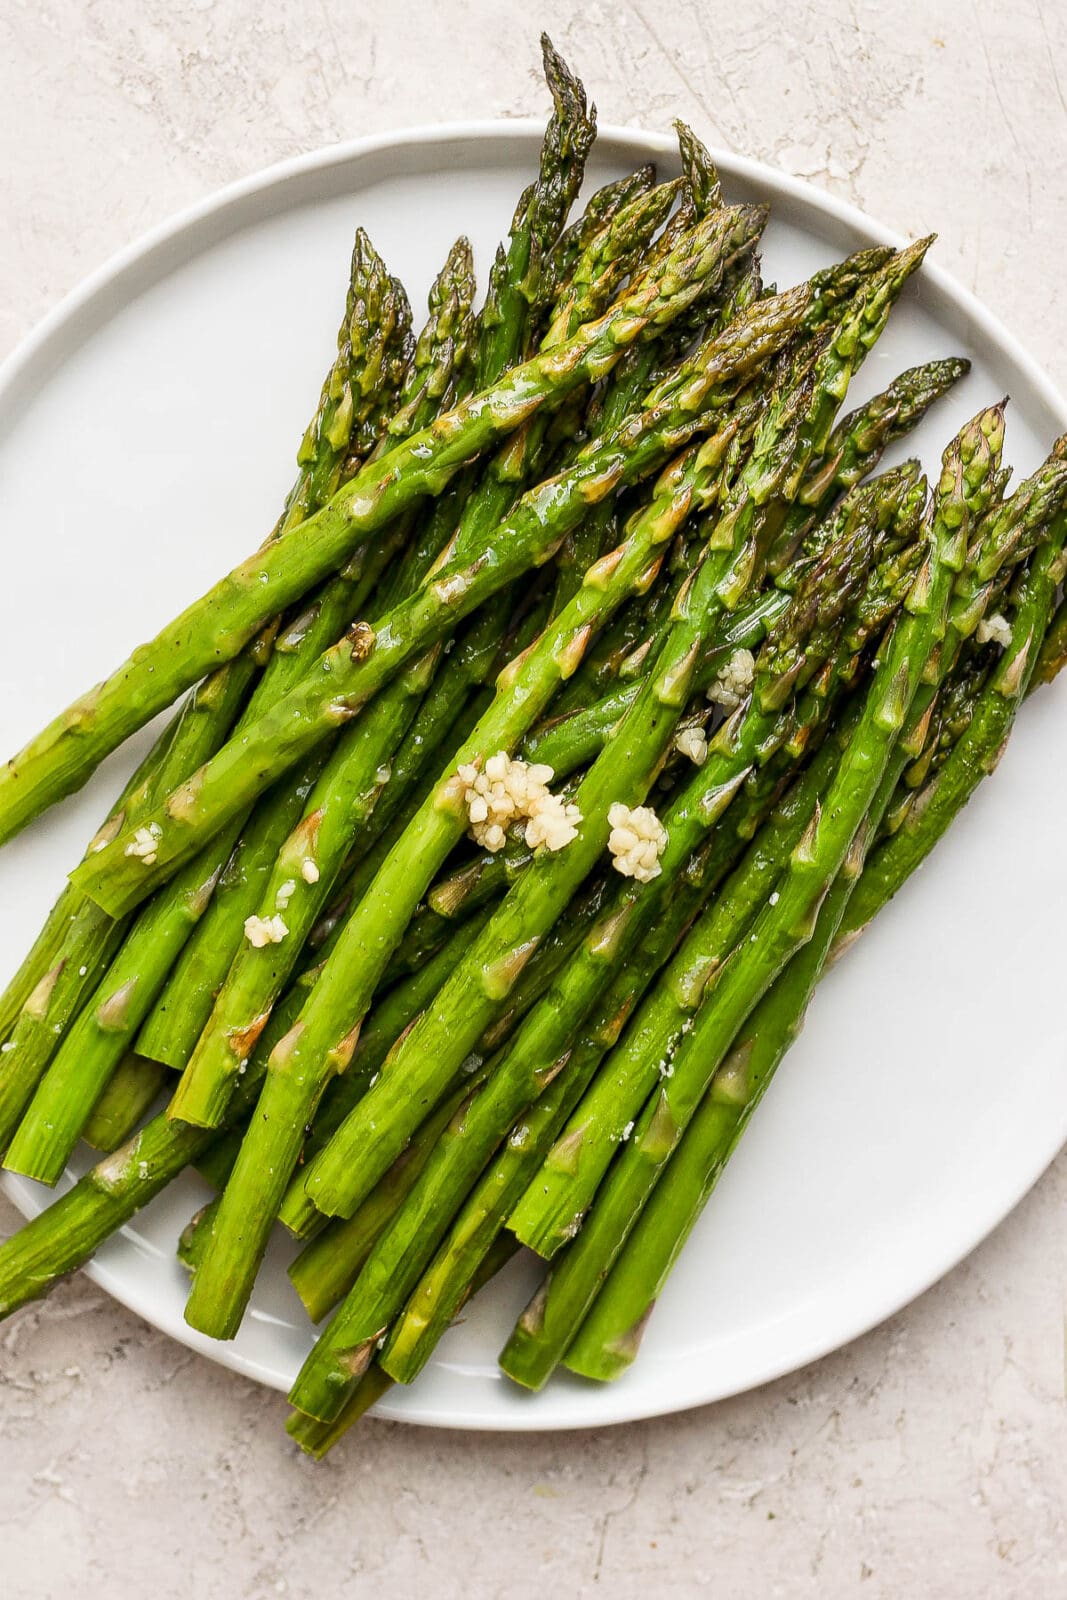 Smoked asparagus on a plate with some added garlic.